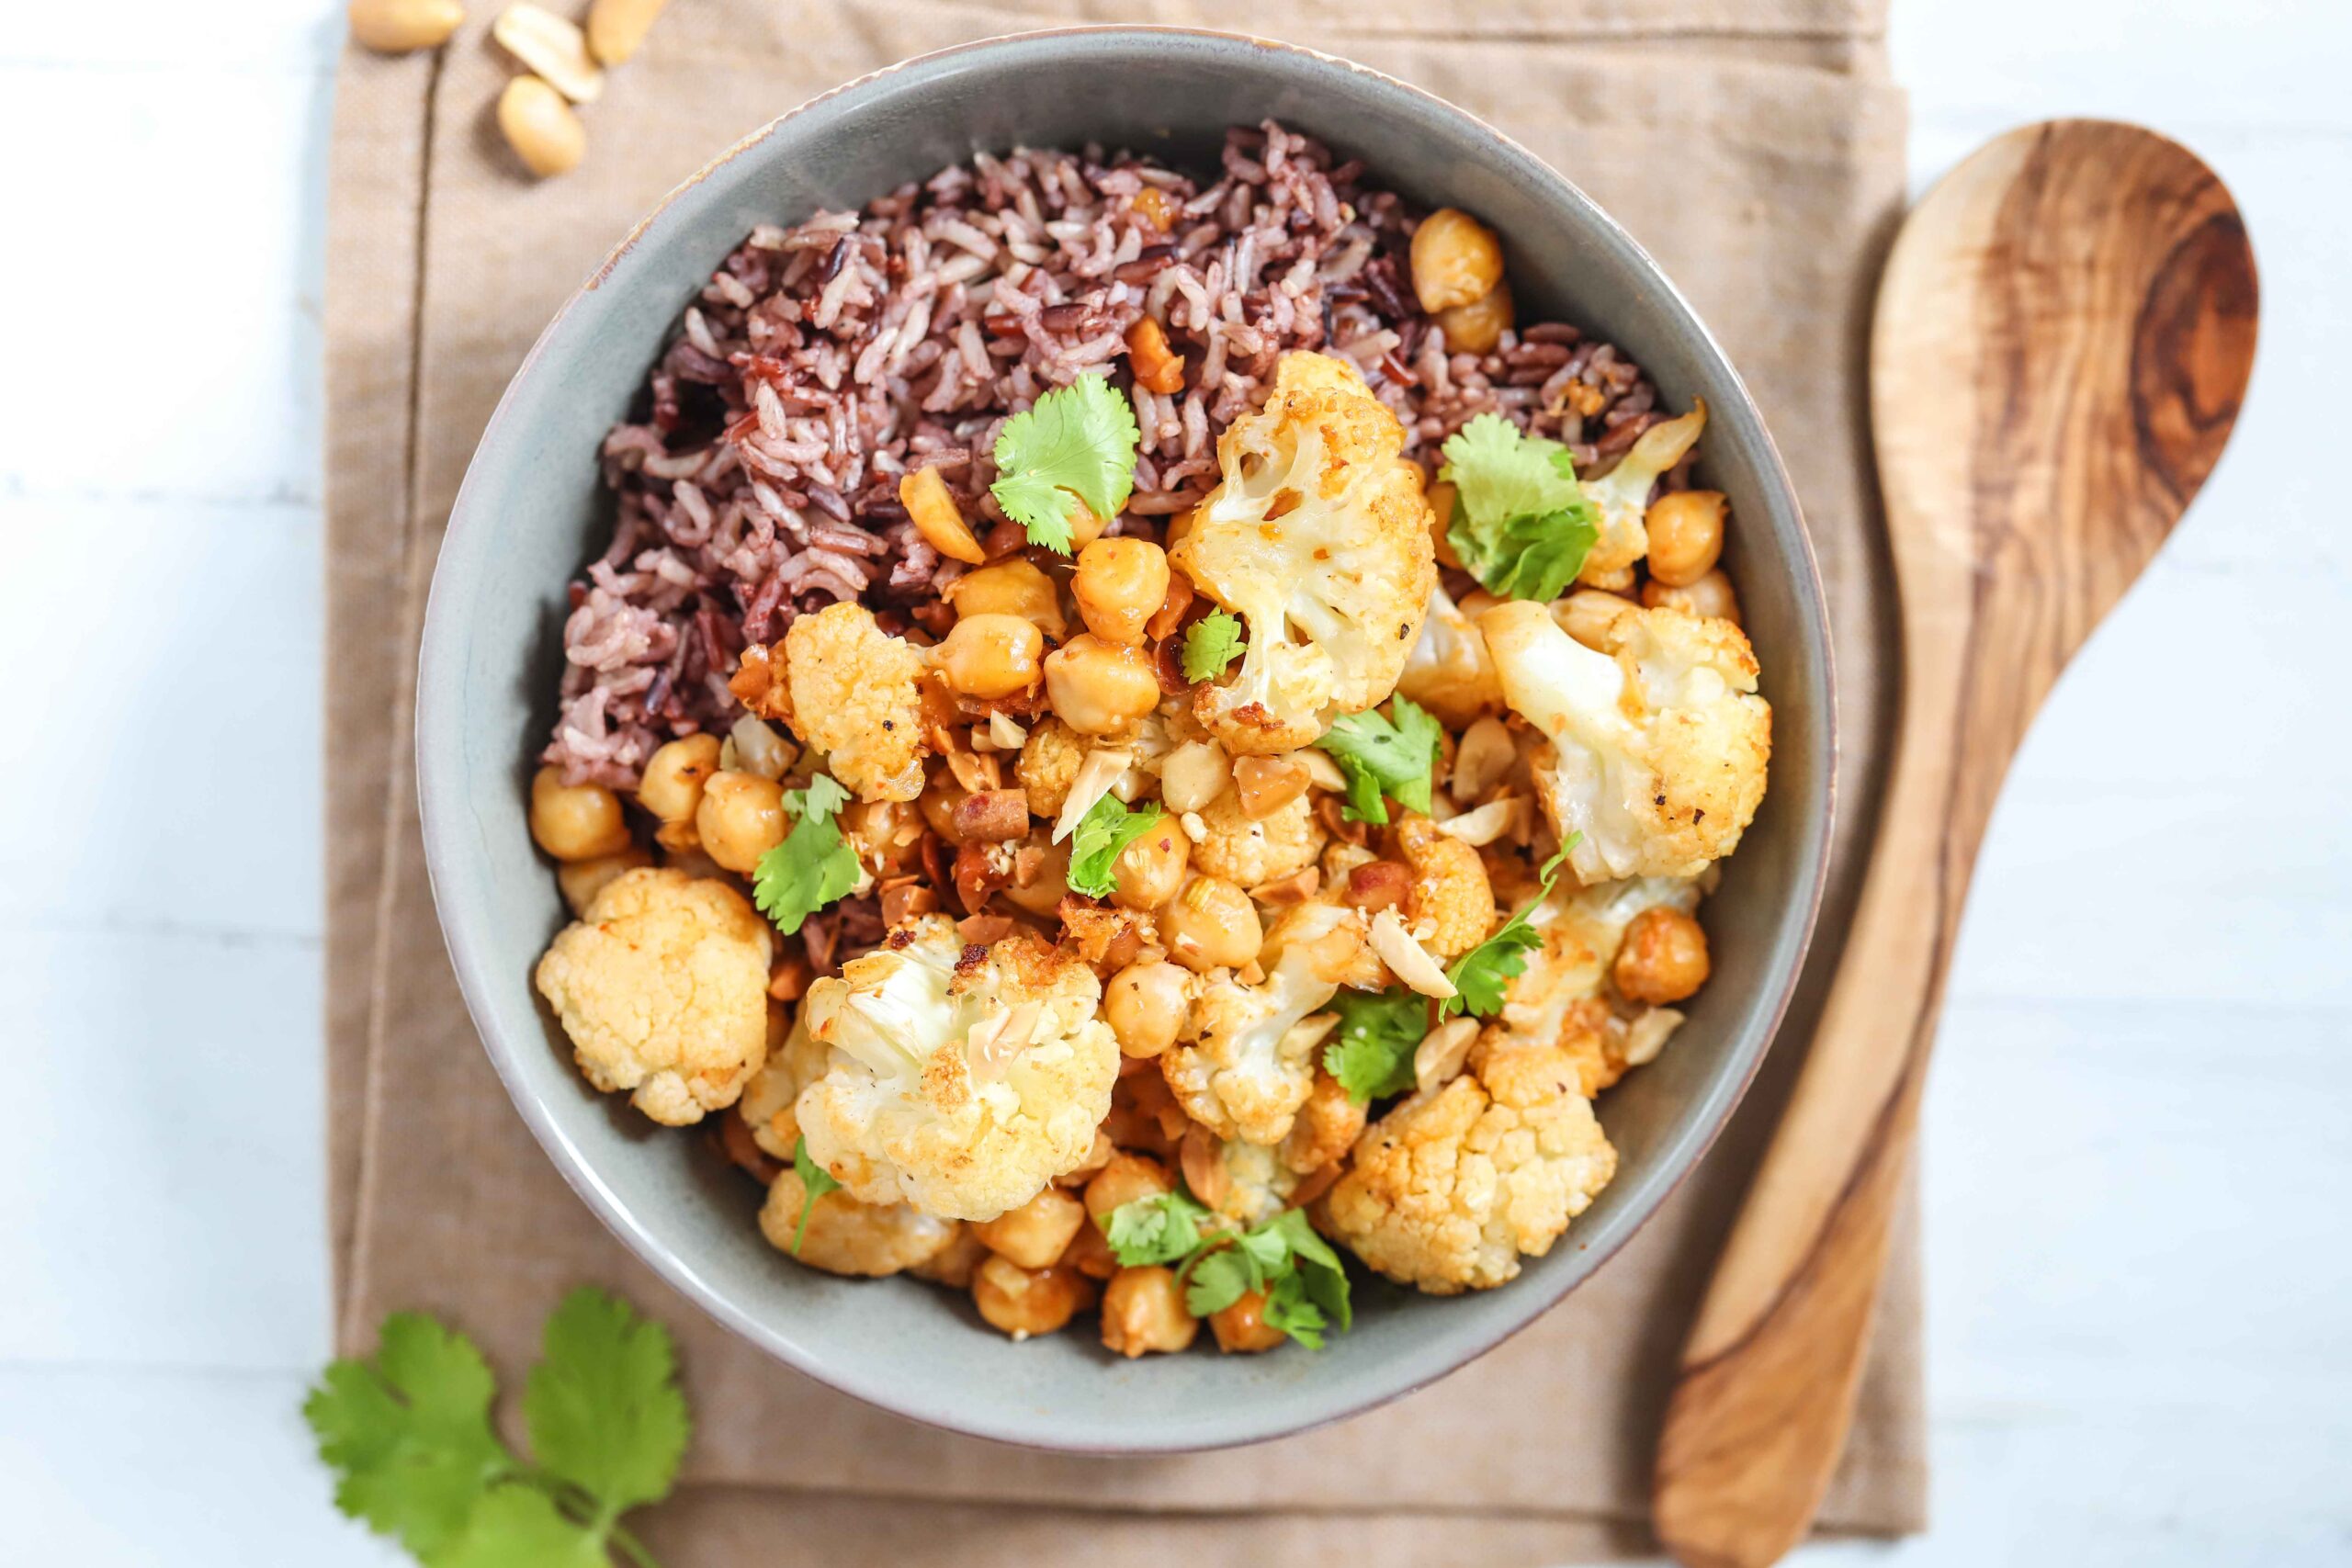 Spicy Cauliflower Chickpea Rice Bowl recipe courtesy of That Green Lyfe